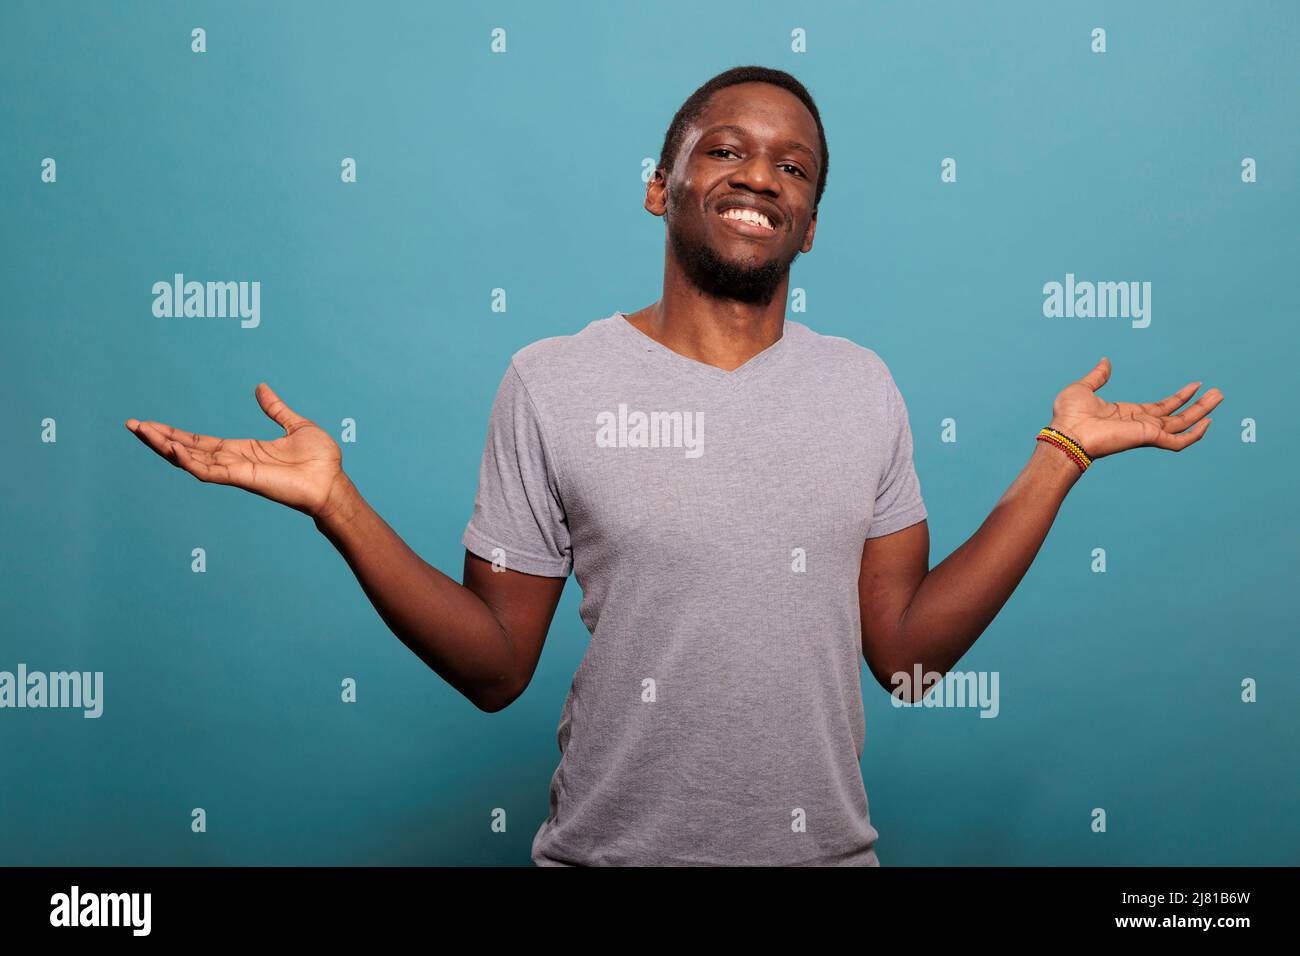 Unsure person rising shoulders and expressing confusion, doing i dont know gesture in studio. Uncertain man feeling indecisive and clueless about answer or solution. Confused guy. Stock Photo